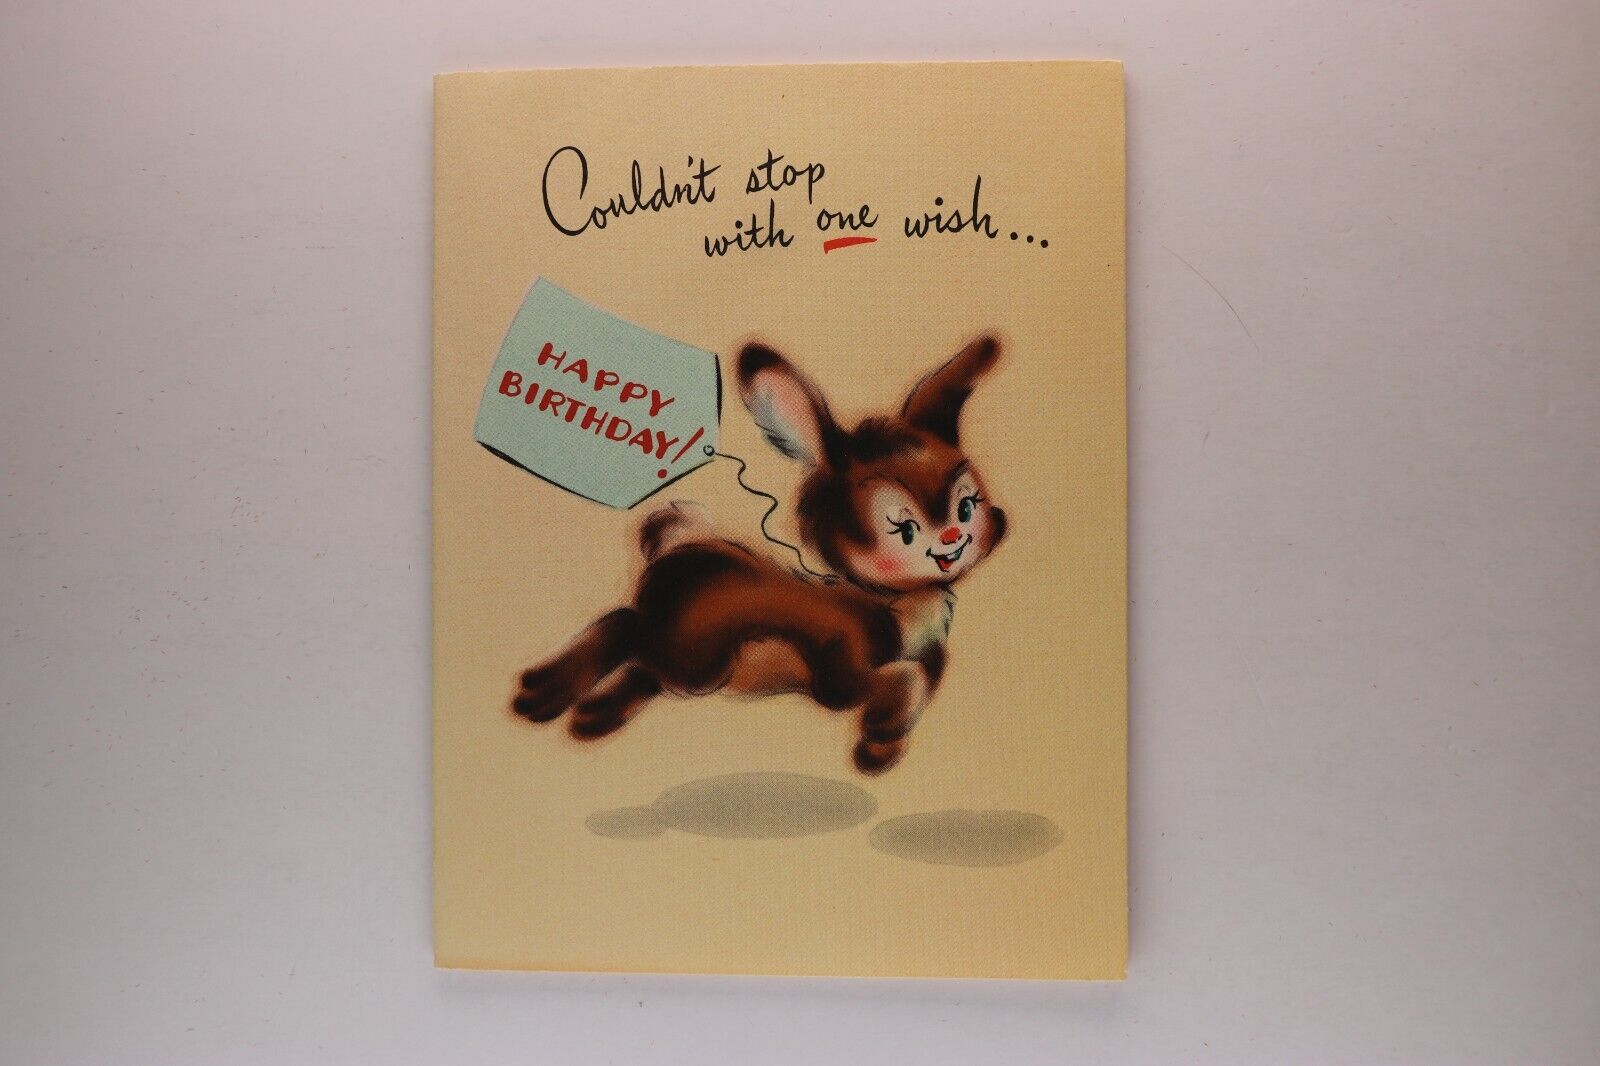 Vintage Cute Kitschy Bunnies Many Happy Birthday Wishes Gibson Smile Card c.1952